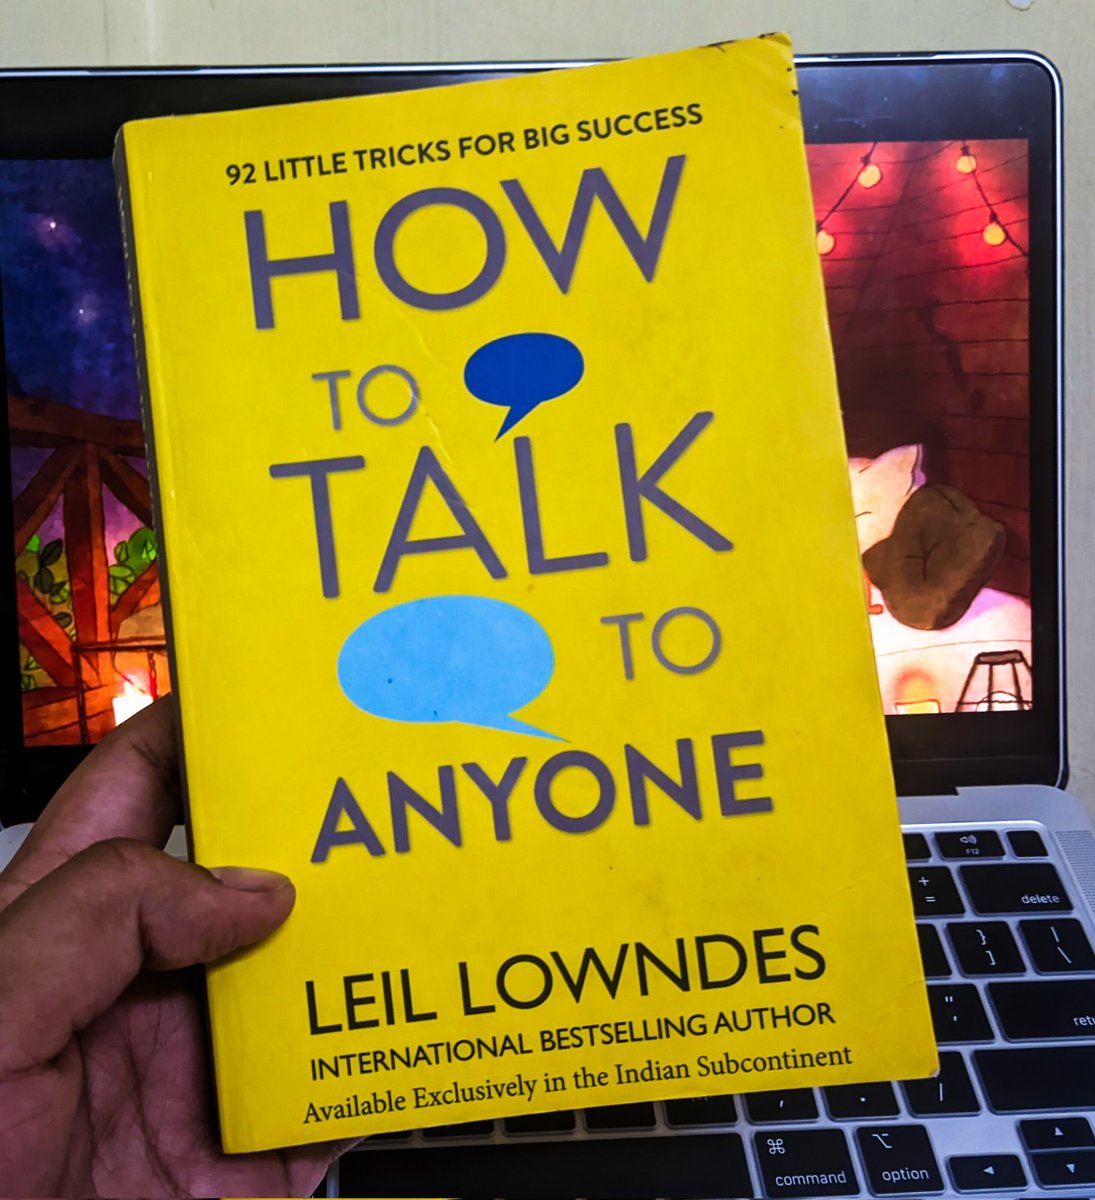 Finally!!! I took this cheerful weekend to finish this insightful book by Liel Lowndes, after leaving  it on a halfway last year!

Loved the way how delightfully Liel switches us chapter by chapter. 

Stay tuned for the major insights.

#Reading #HowToTalkToAnyone  #LielLowndes